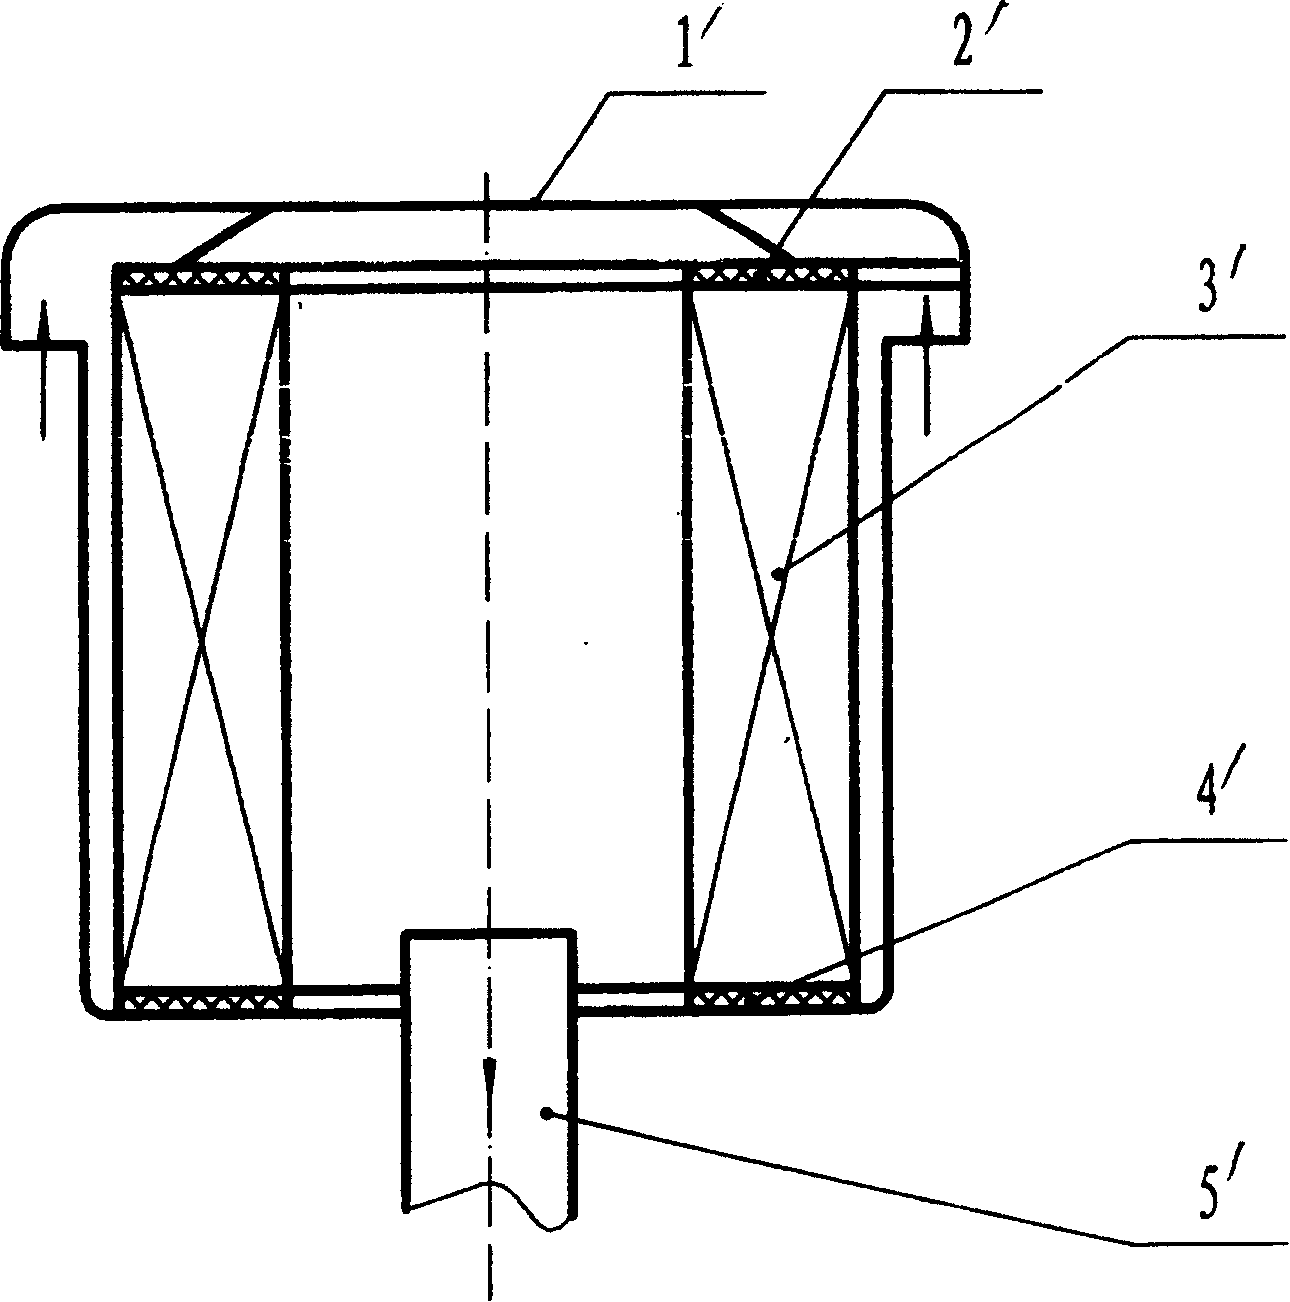 Silencing filter suitable for supercharging internal combustion engine air inlet system